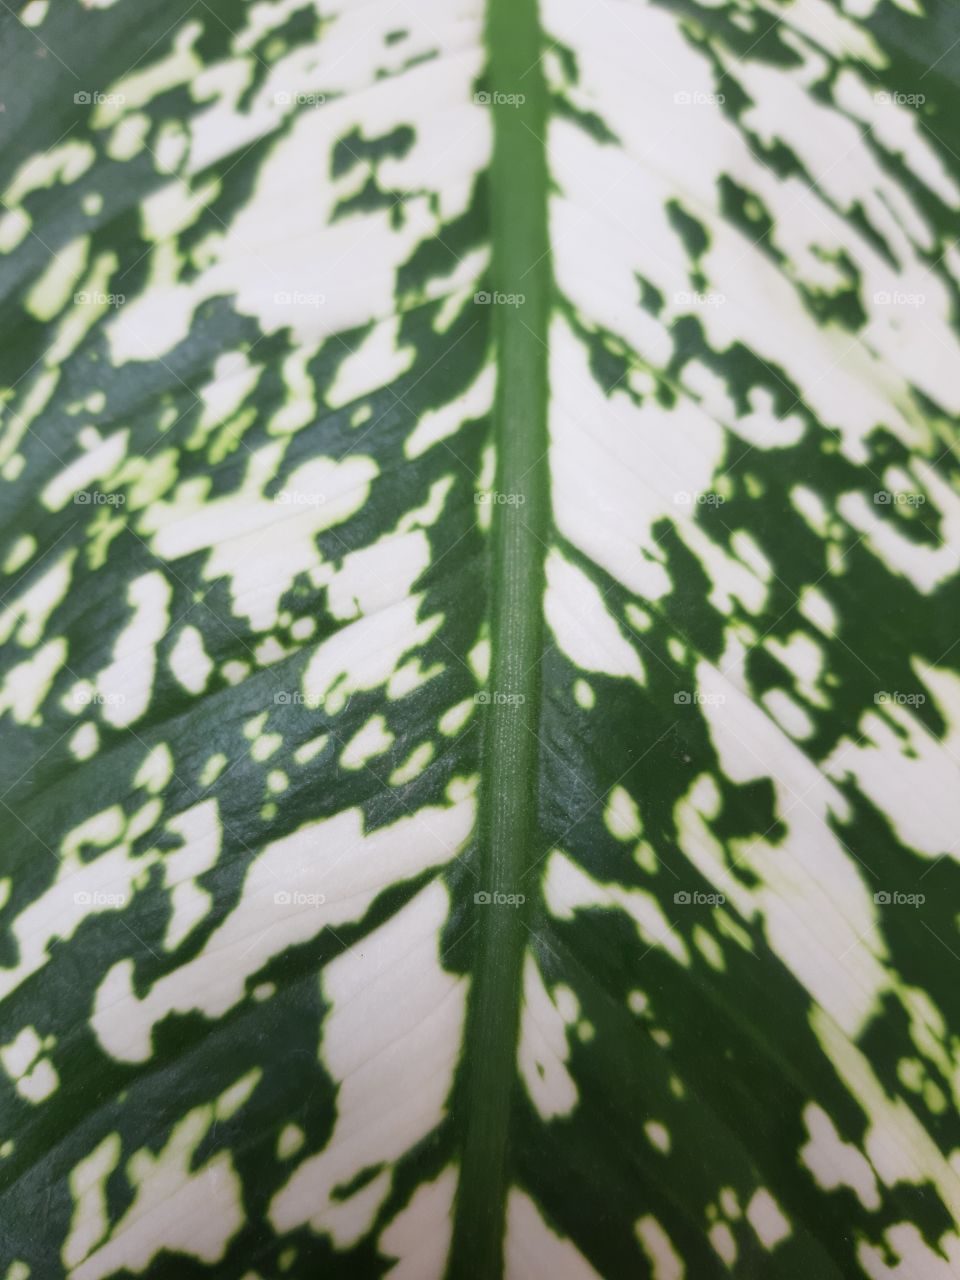 The pattern of leaf